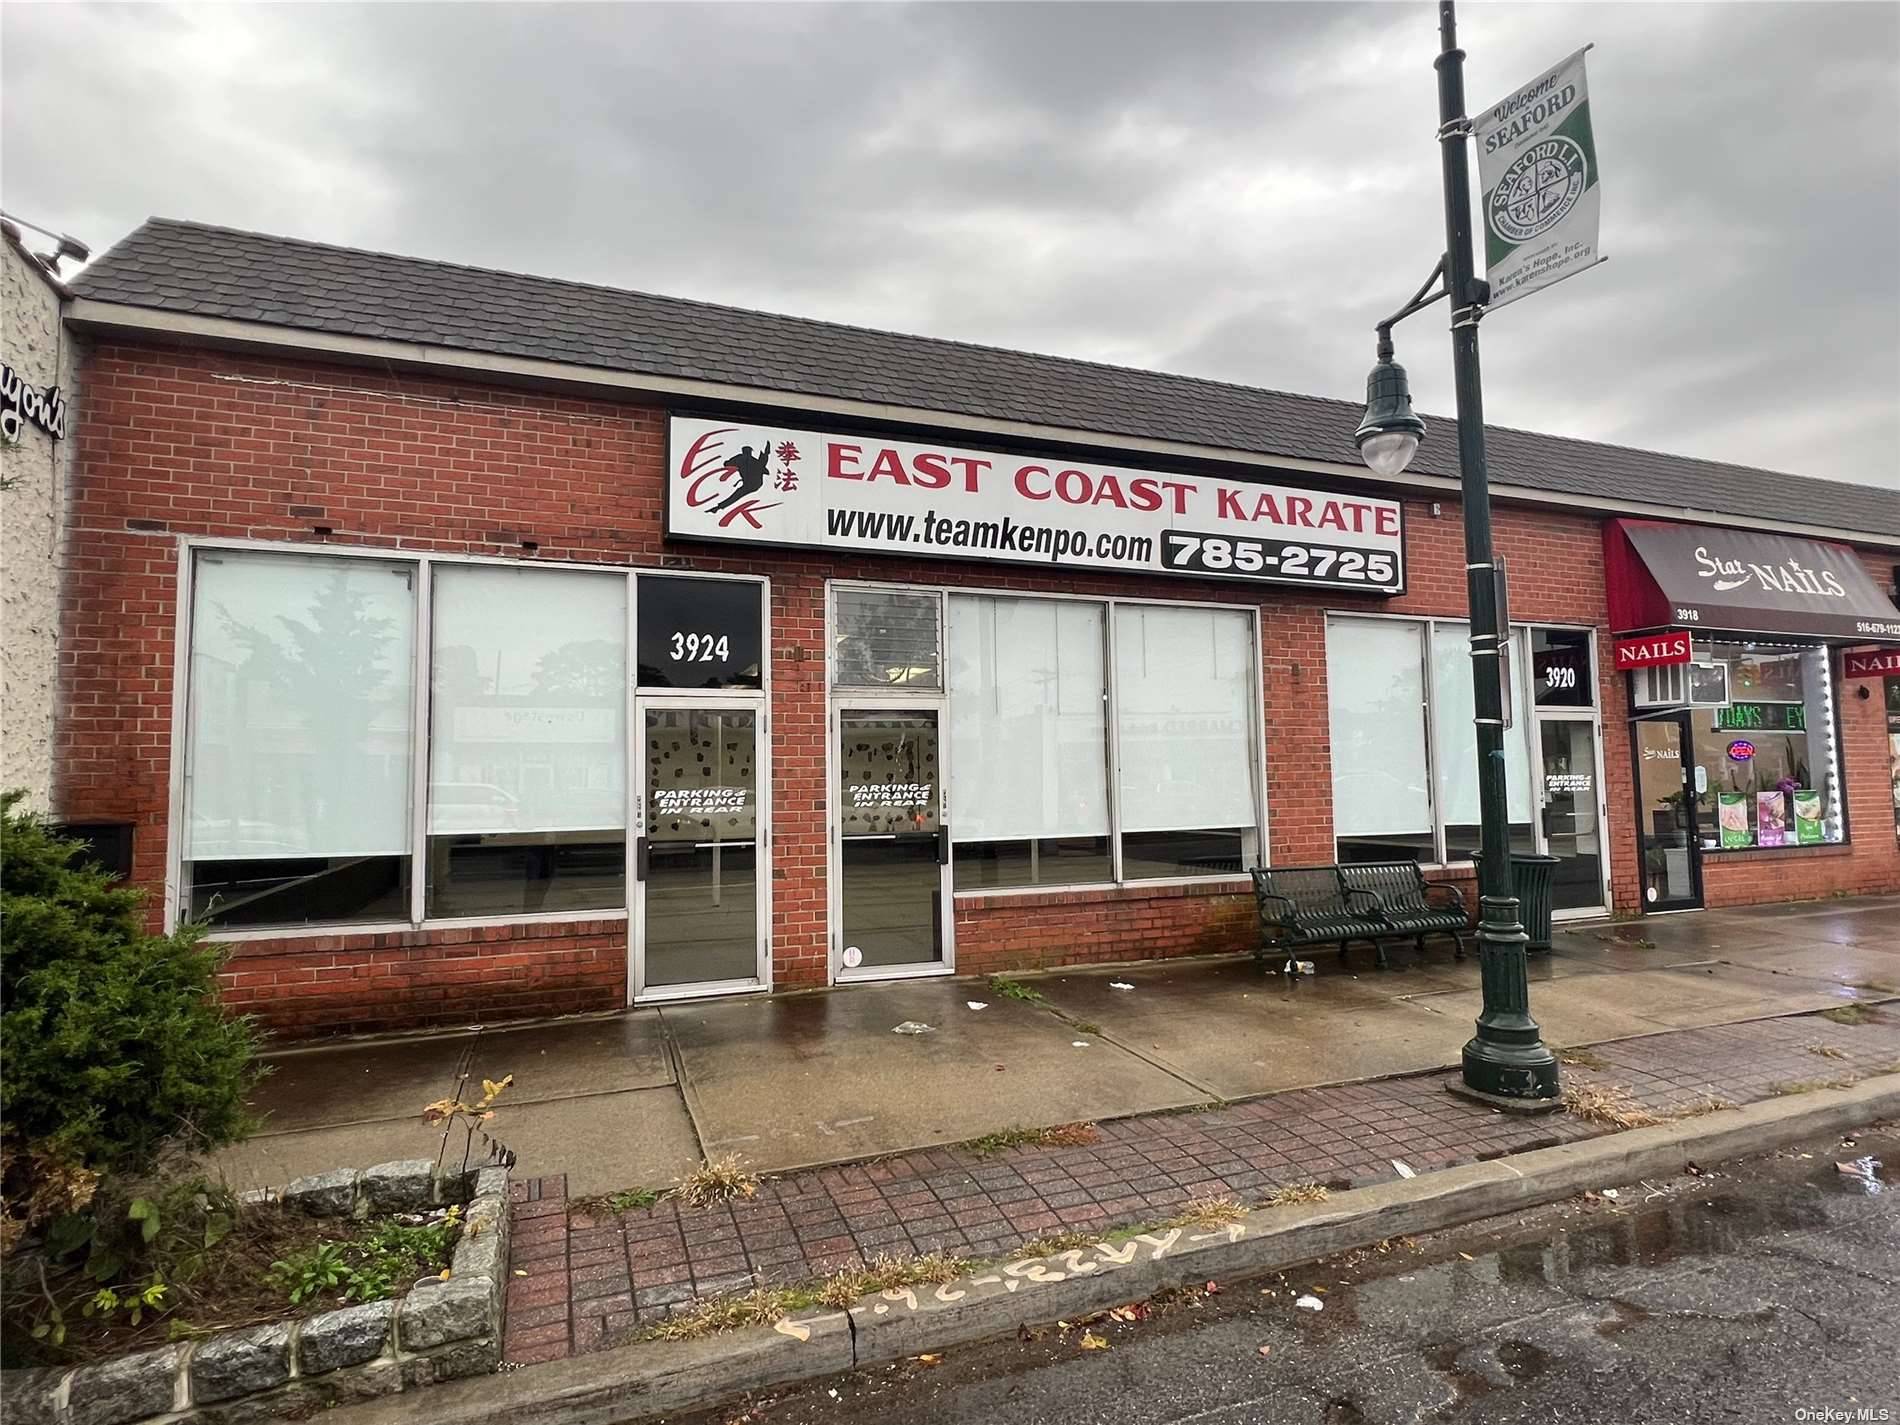 APPROXIMATELY 2850 SF SPACE USED PREVIOUSLY AS A KARATE SCHOOL INCLUDING 4 VERY LARGE EXERCISING ROOMS, BATHROOM, LARGE WAITING AREA W A LOT OF PARKING REAR, NEXT TO PUBLIC PARKING, ...